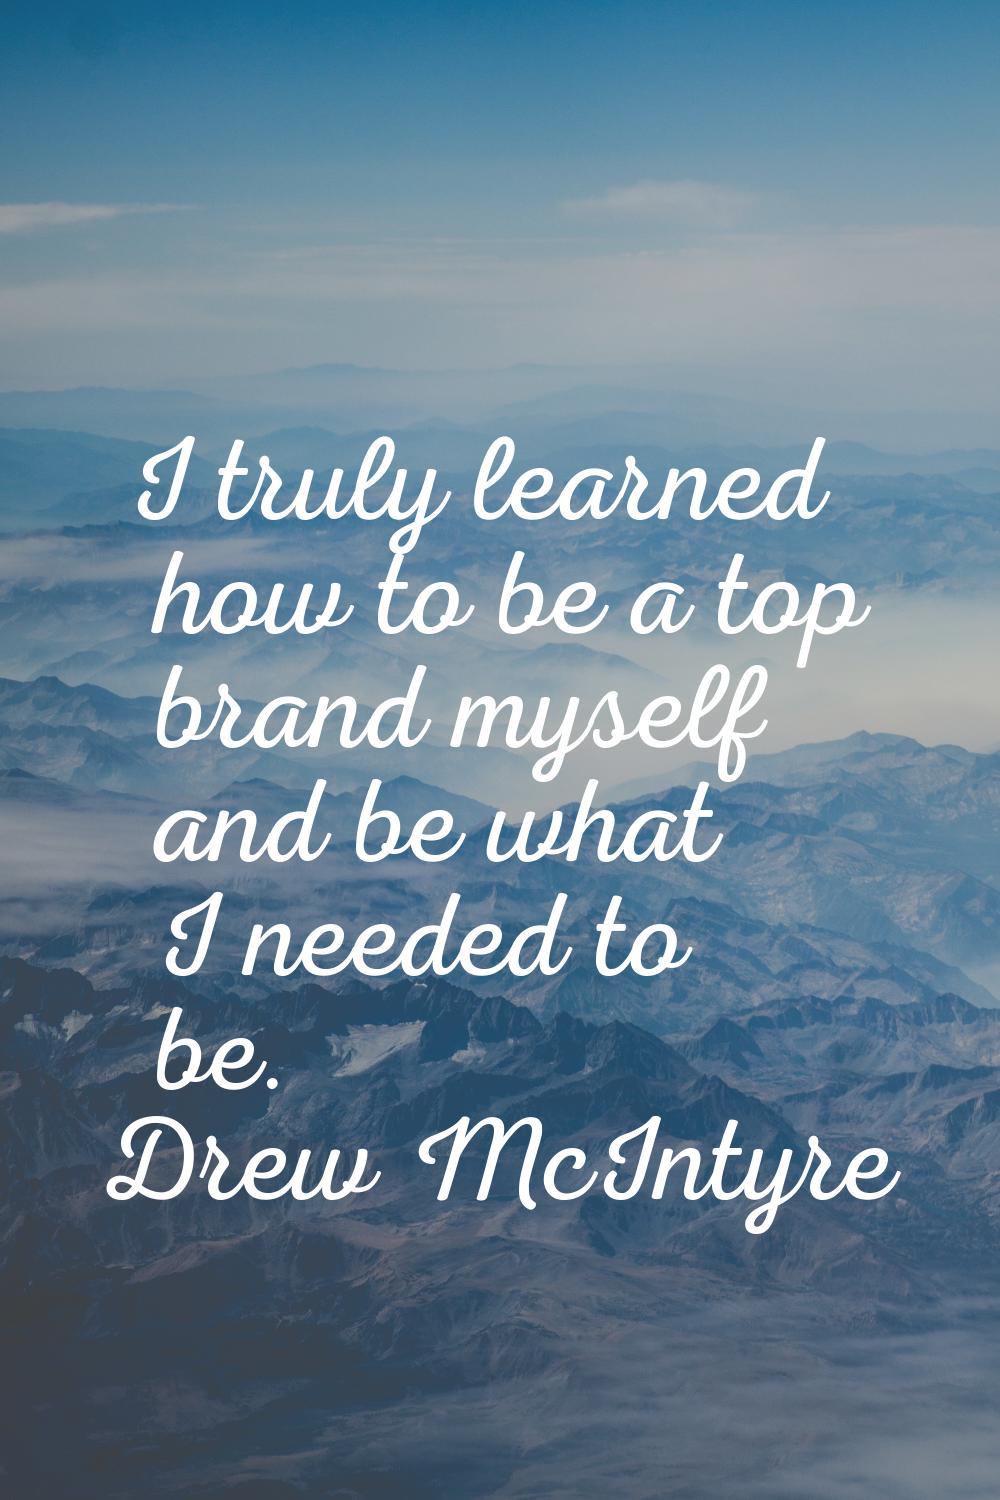 I truly learned how to be a top brand myself and be what I needed to be.